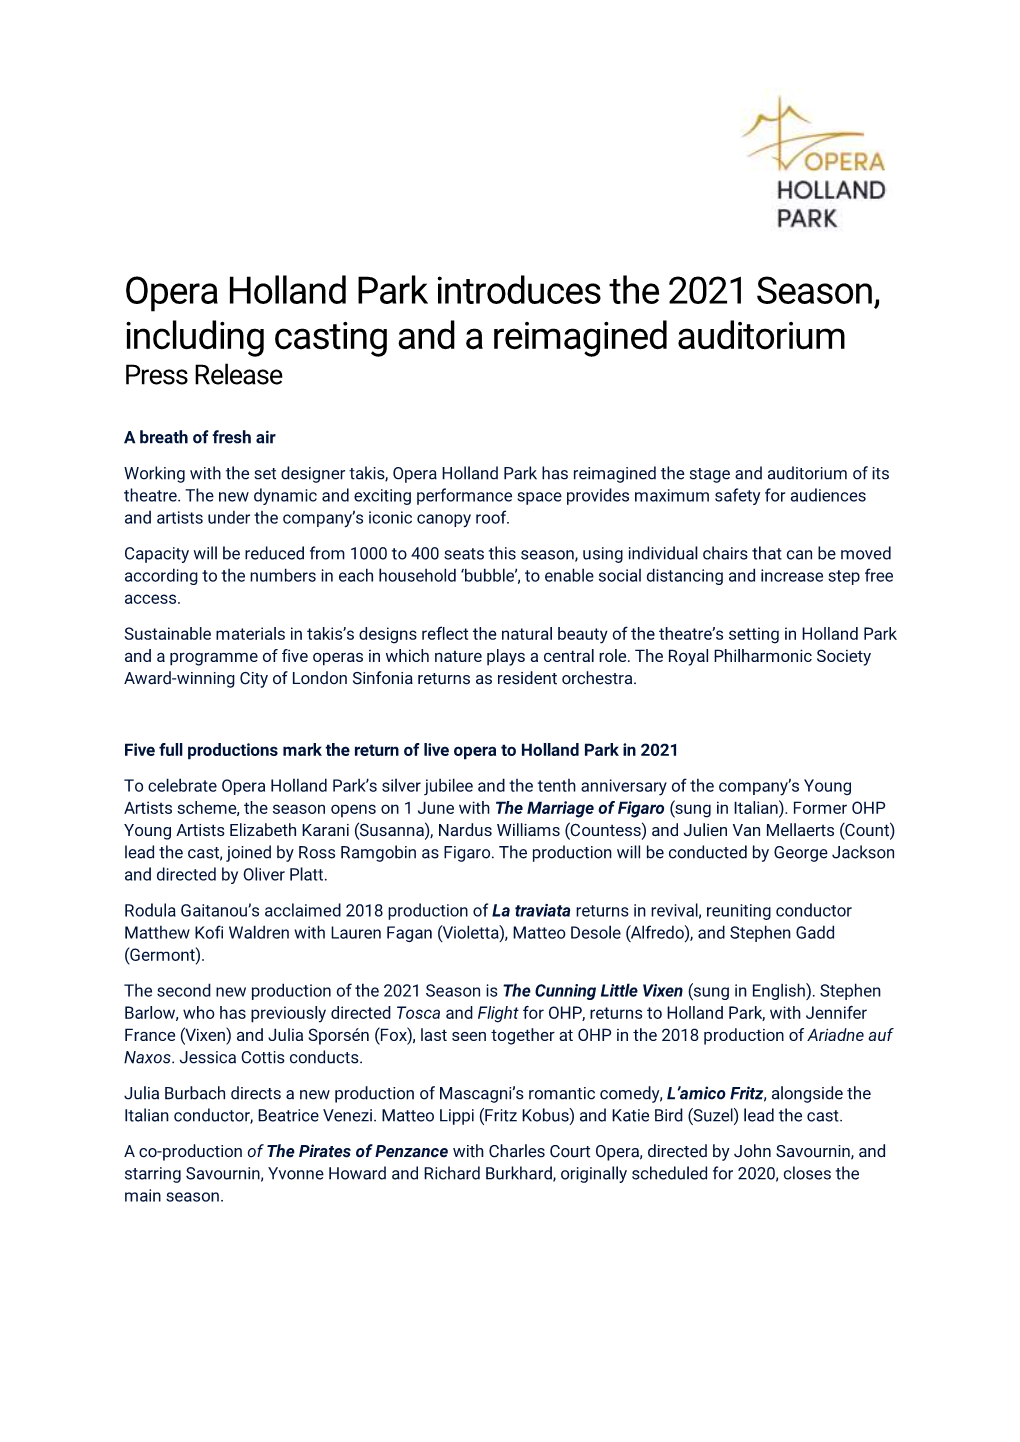 Opera Holland Park Introduces the 2021 Season, Including Casting and a Reimagined Auditorium Press Release